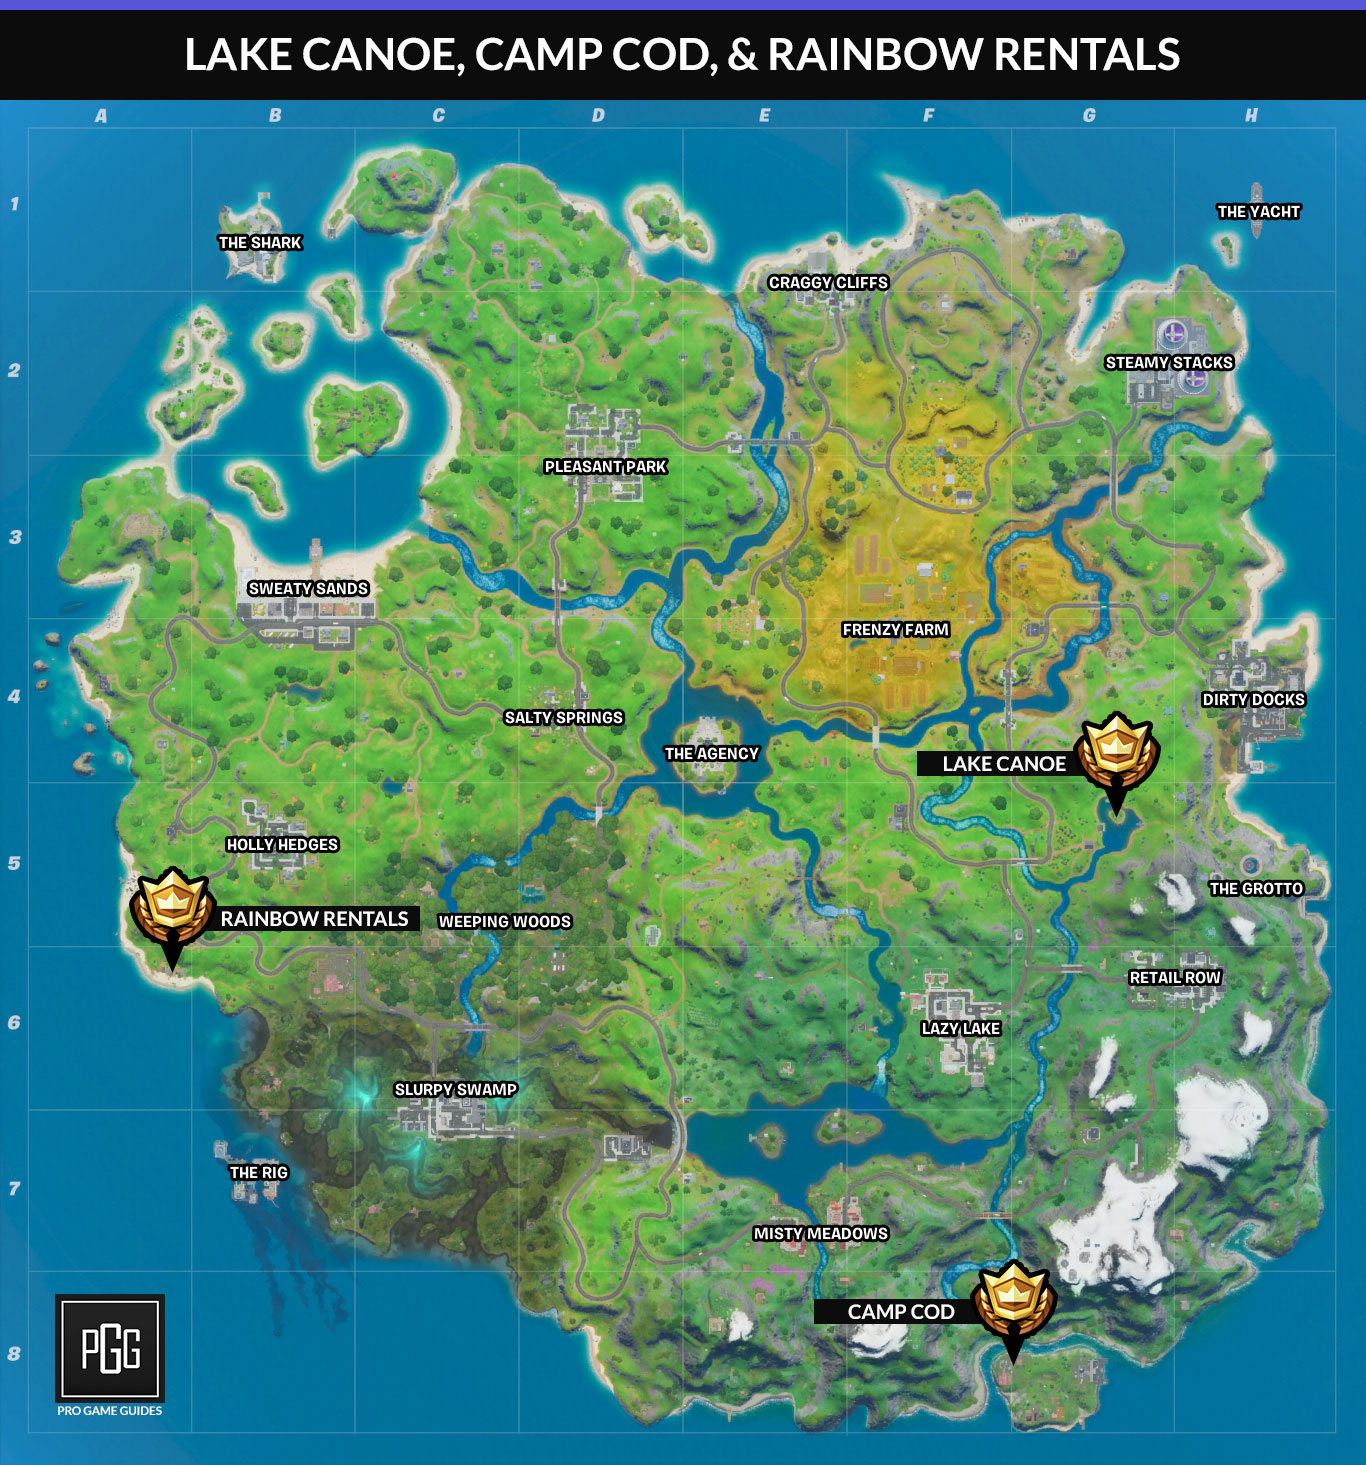 Fortnite Lake Canoe, Camp Cod, Rainbow Rentals Locations Pro Game Guides